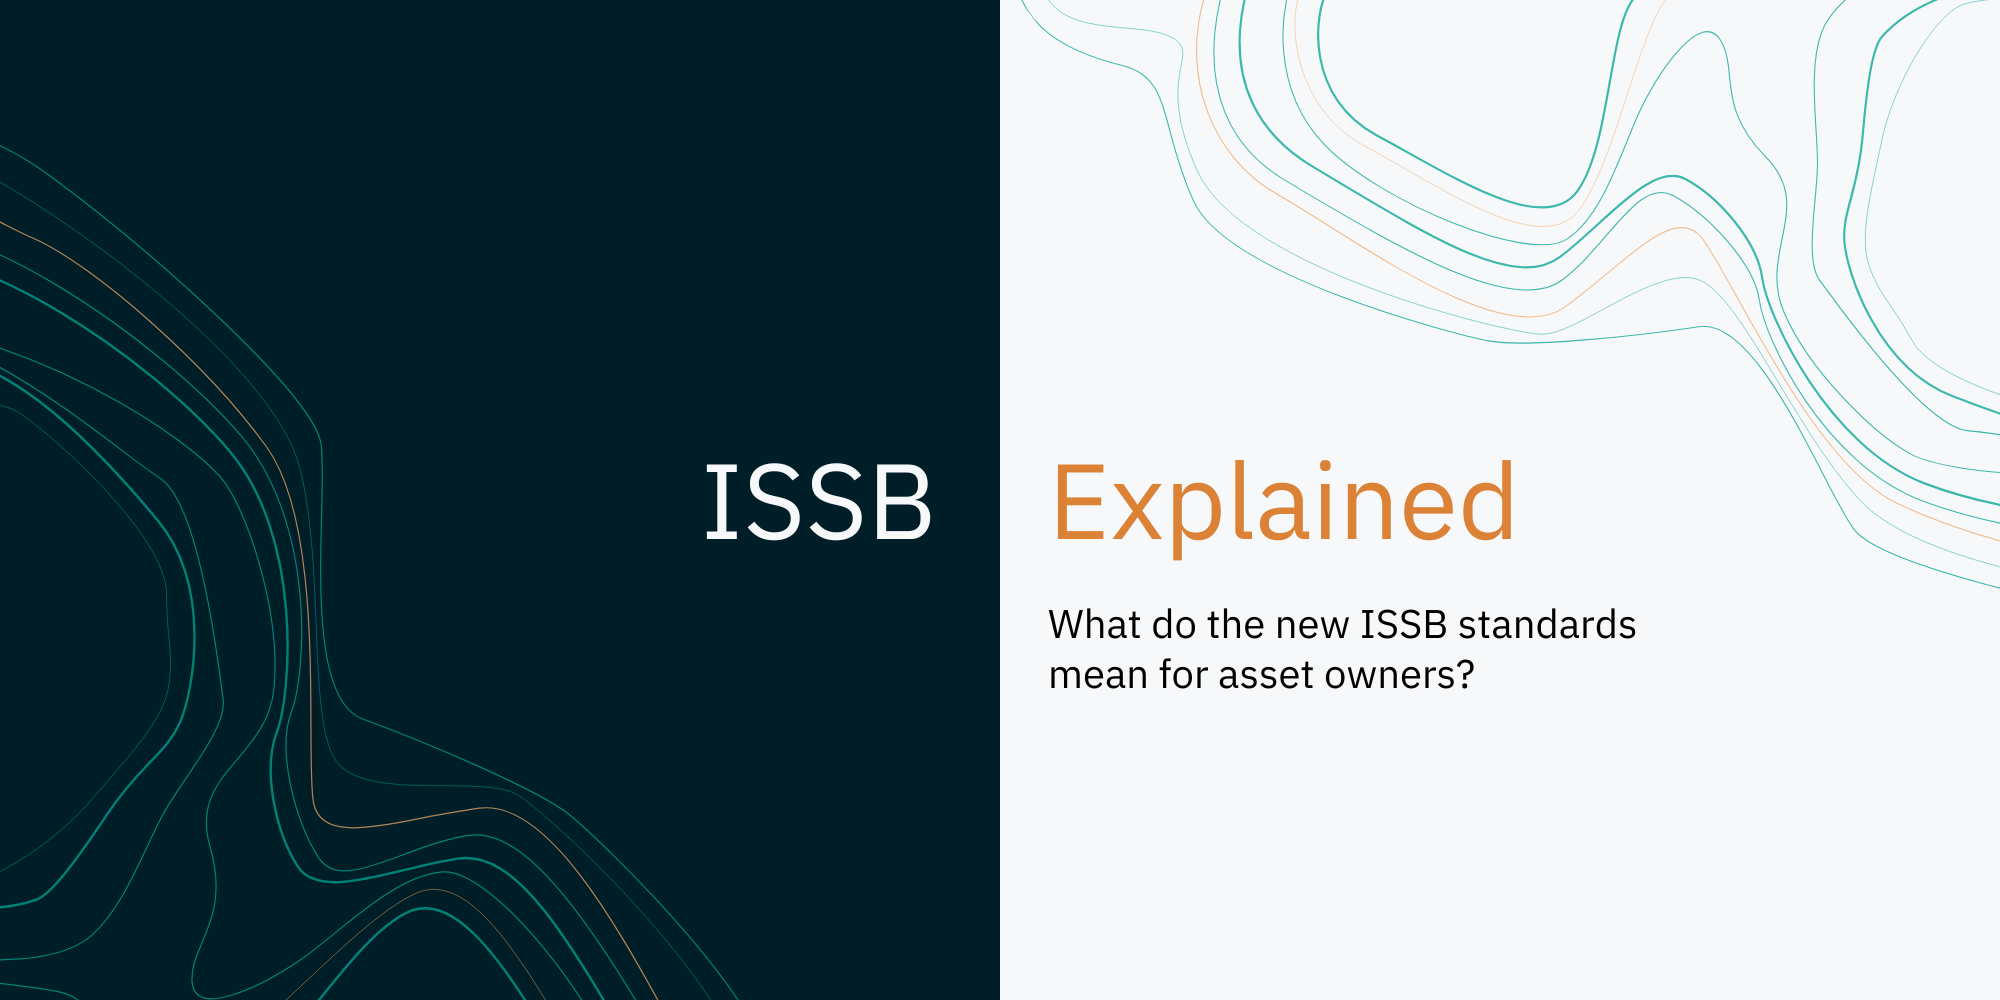 ISSB Explained: What do the new ISSB standards mean for asset owners? featured image